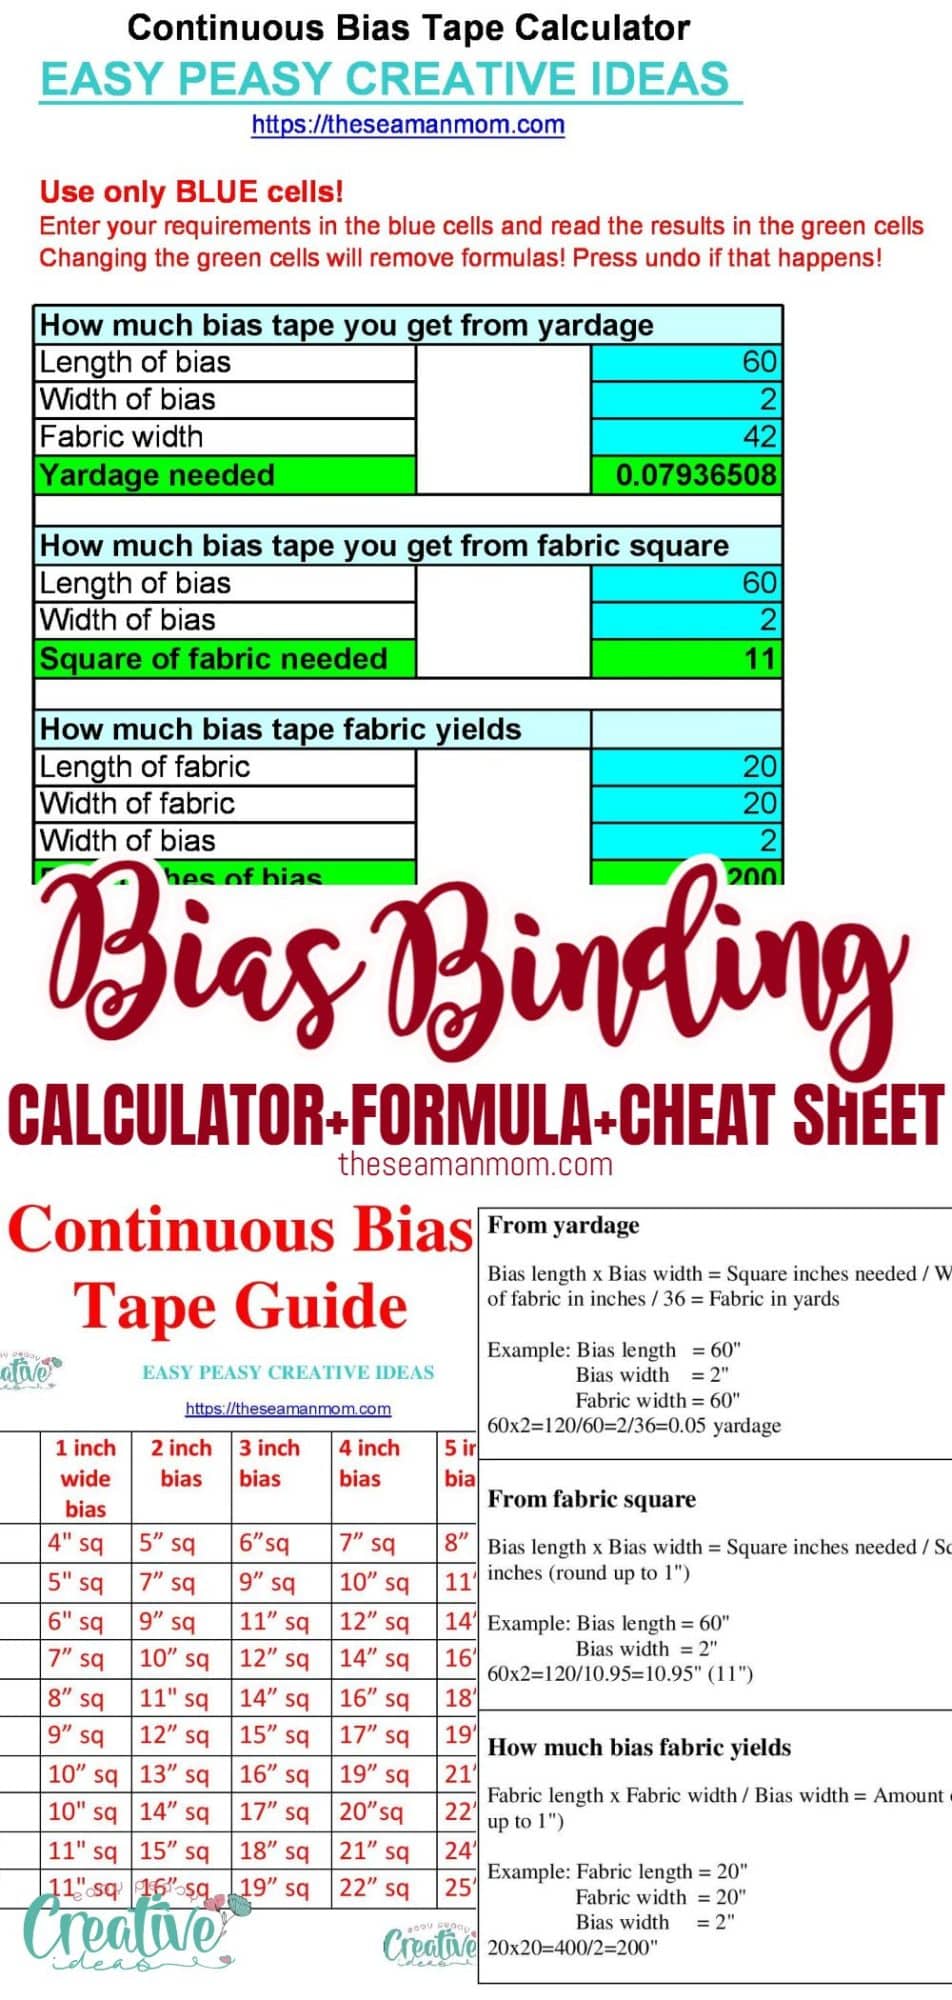 Bias calculator with formula and cheat sheet